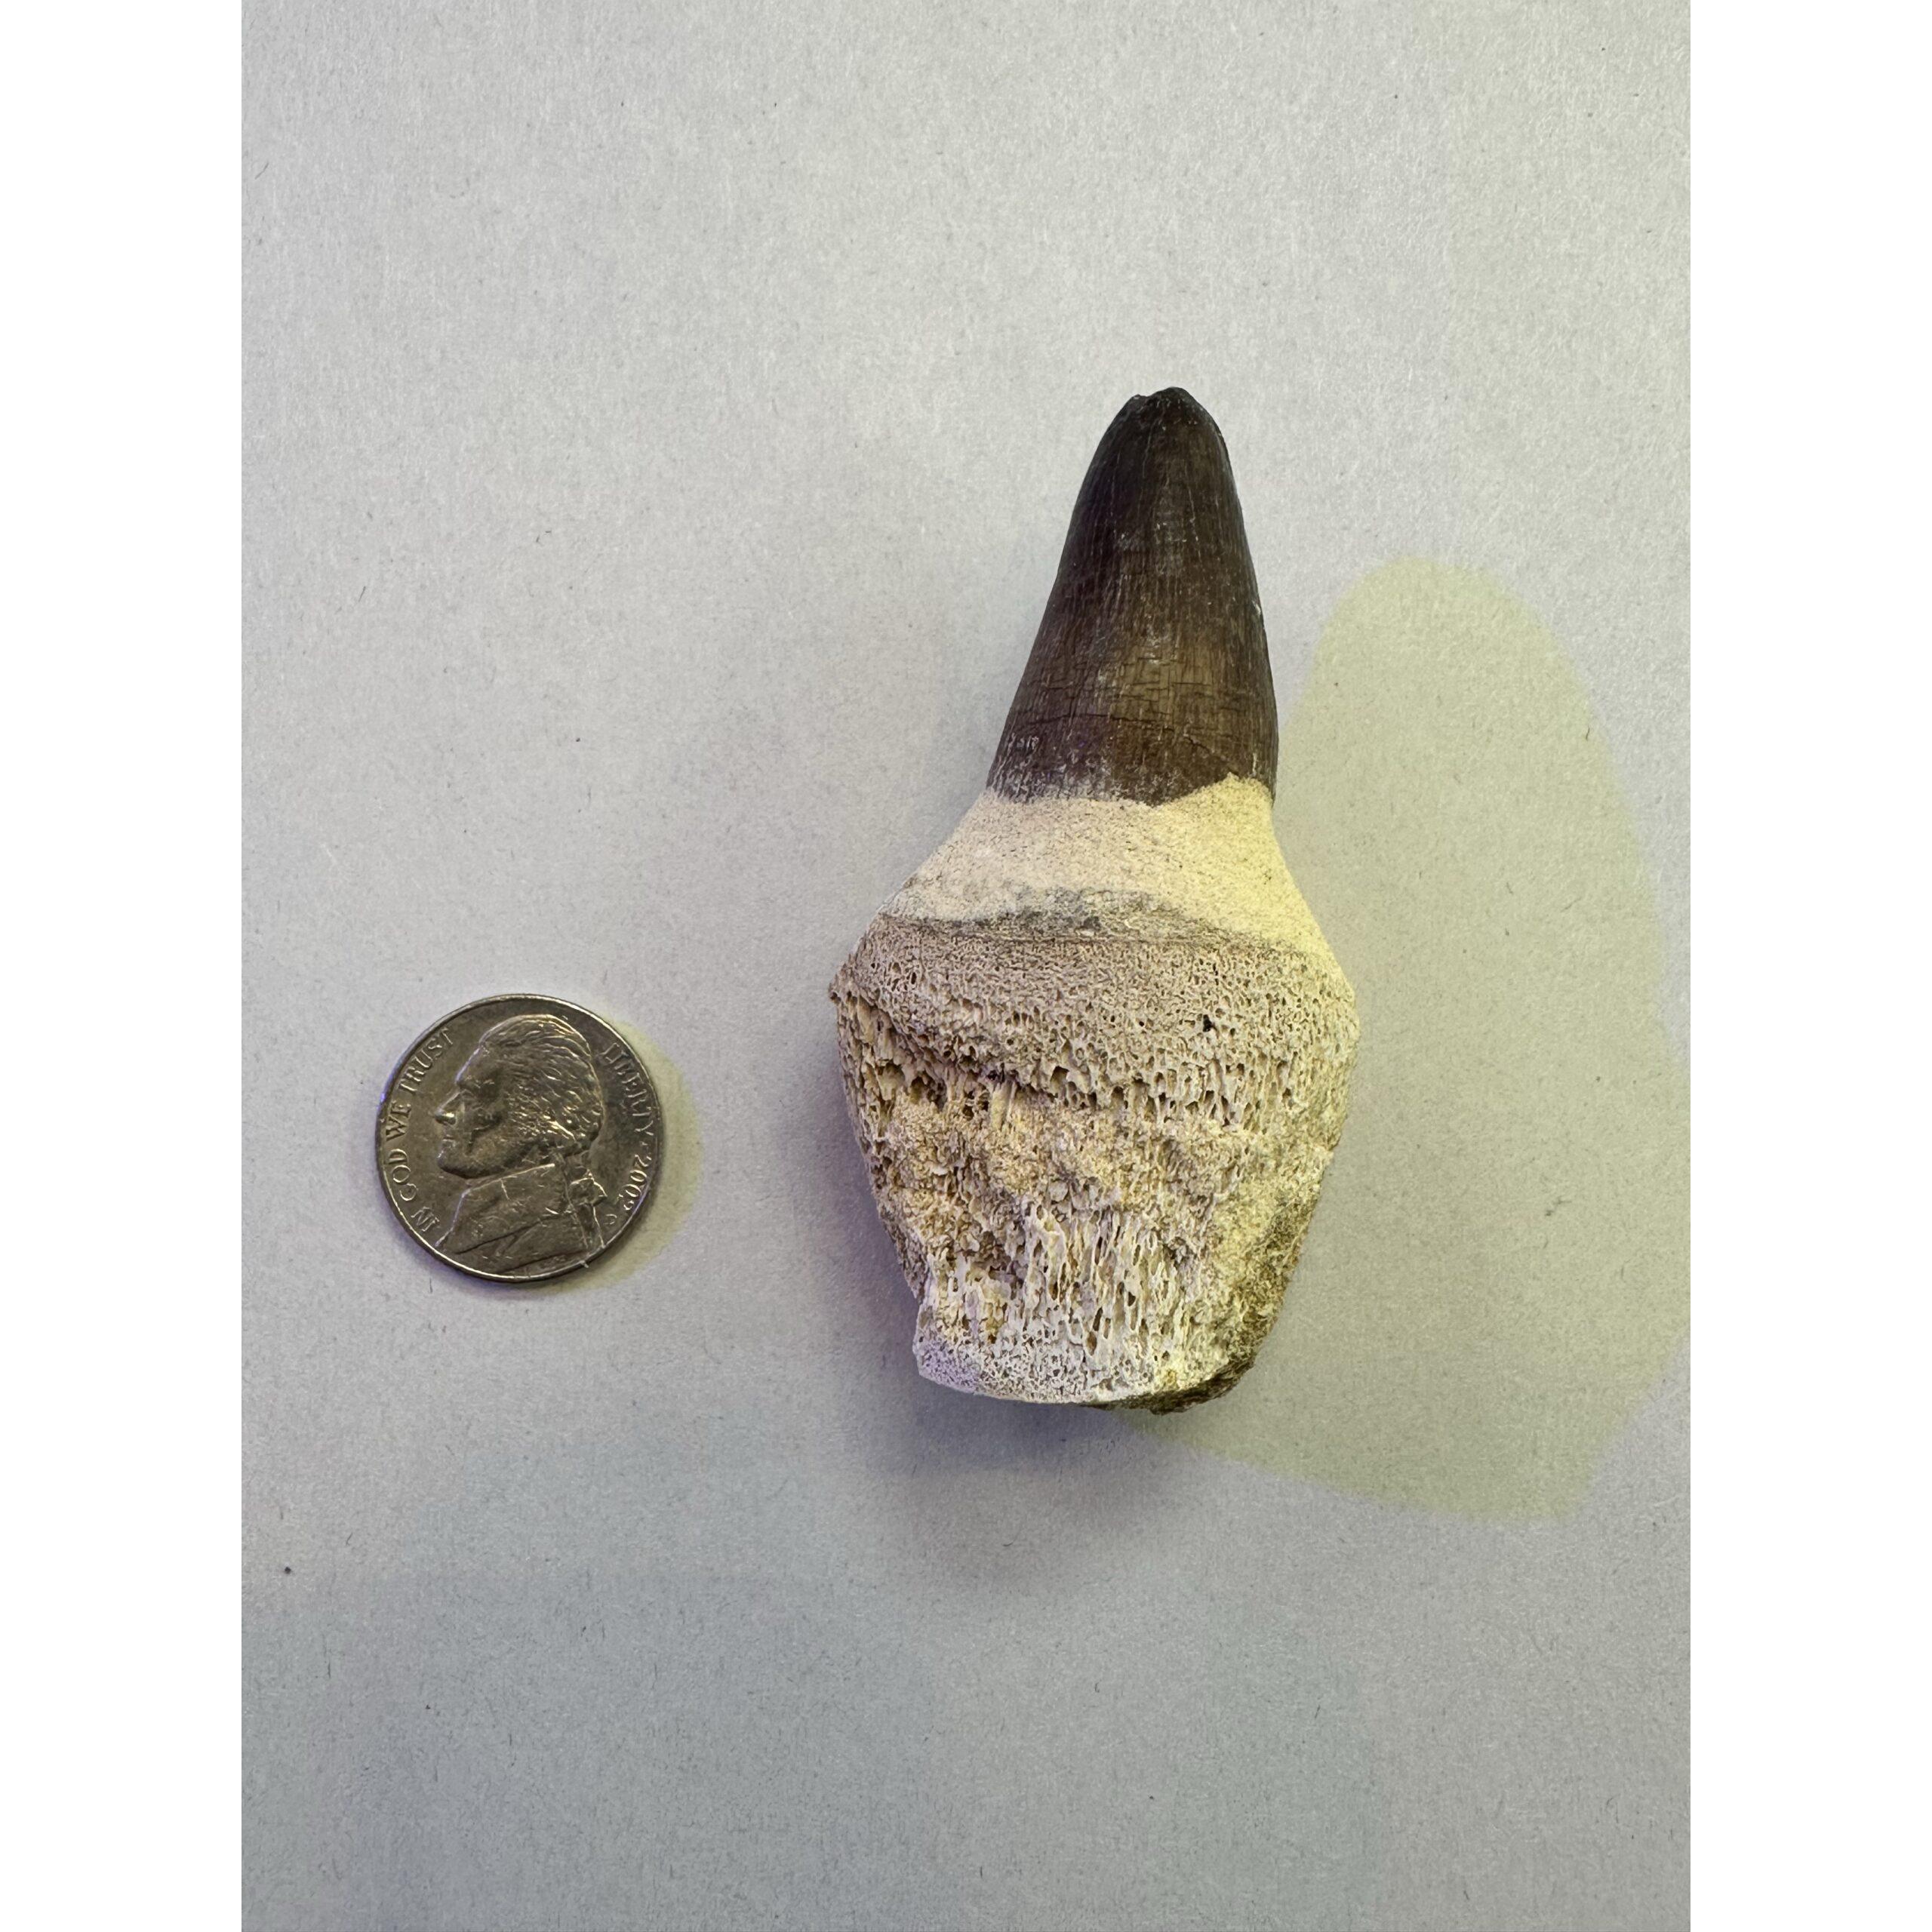 Mosasaurus tooth with root, great 2 7/8 inch fossil Prehistoric Online